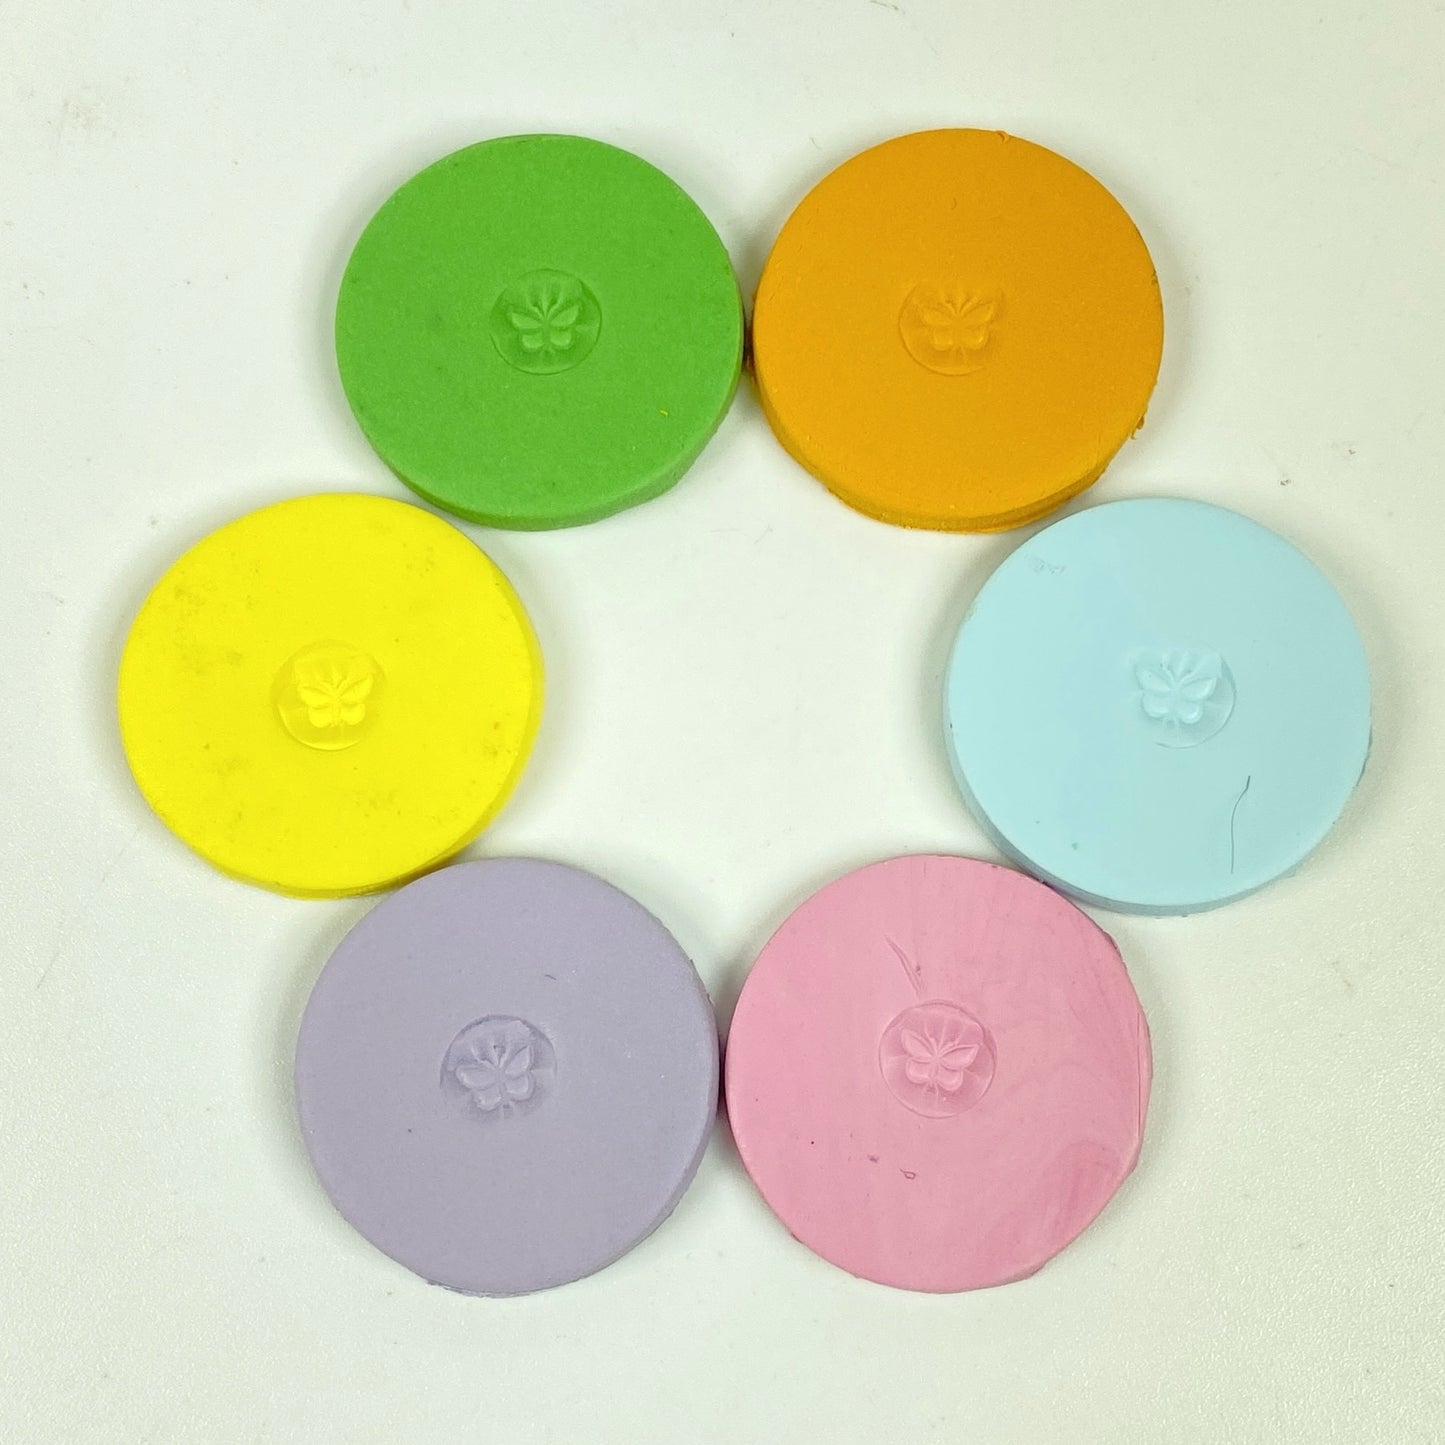 Peter Cottontail Easter Palette - a circle of the sample clay discs